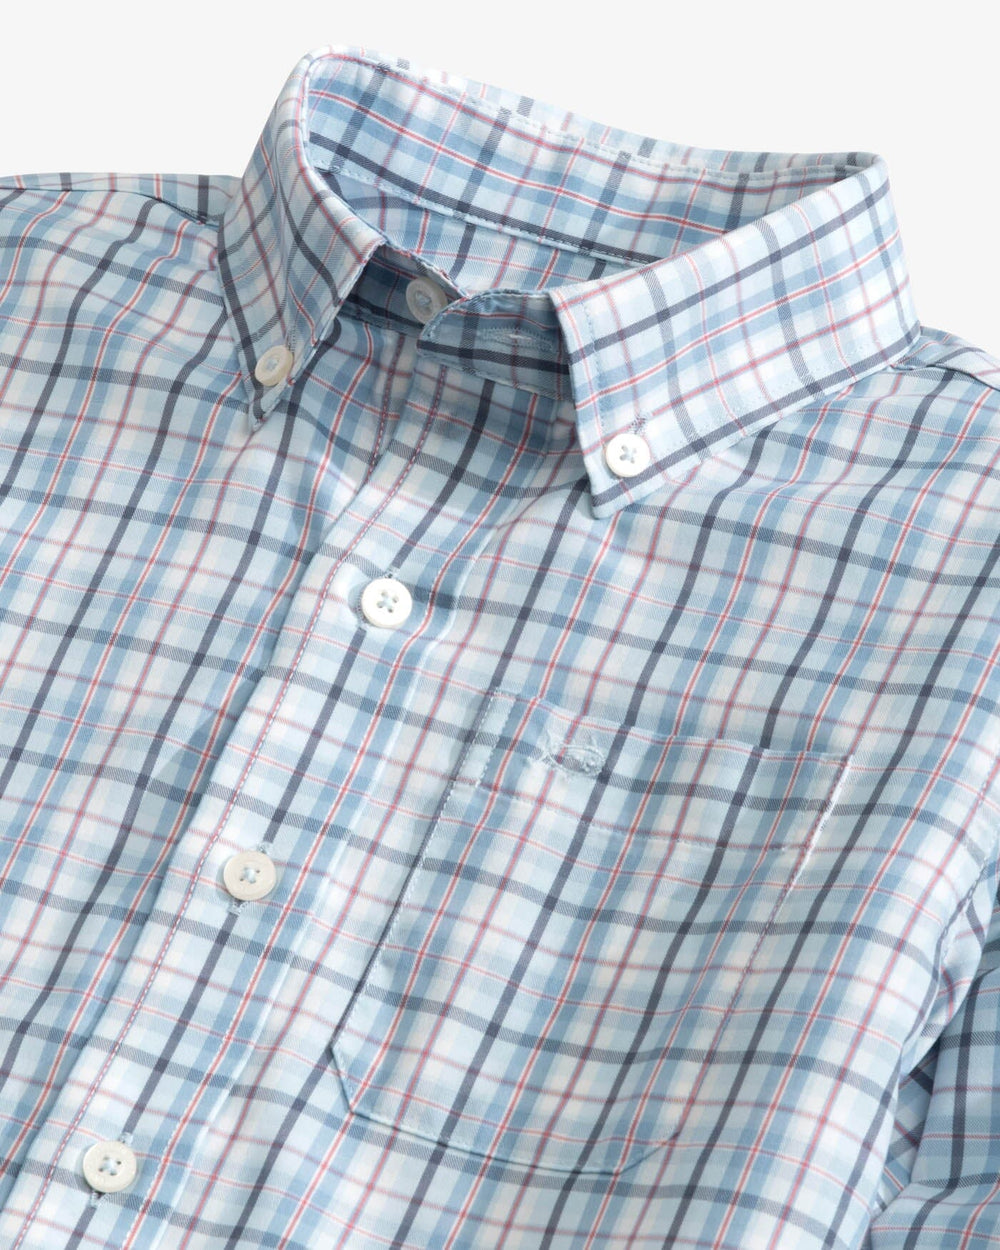 The detail view of the Southern Tide Boys Patton Plaid Intercoastal Long Sleeve Sportshirt by Southern Tide - Dream Blue